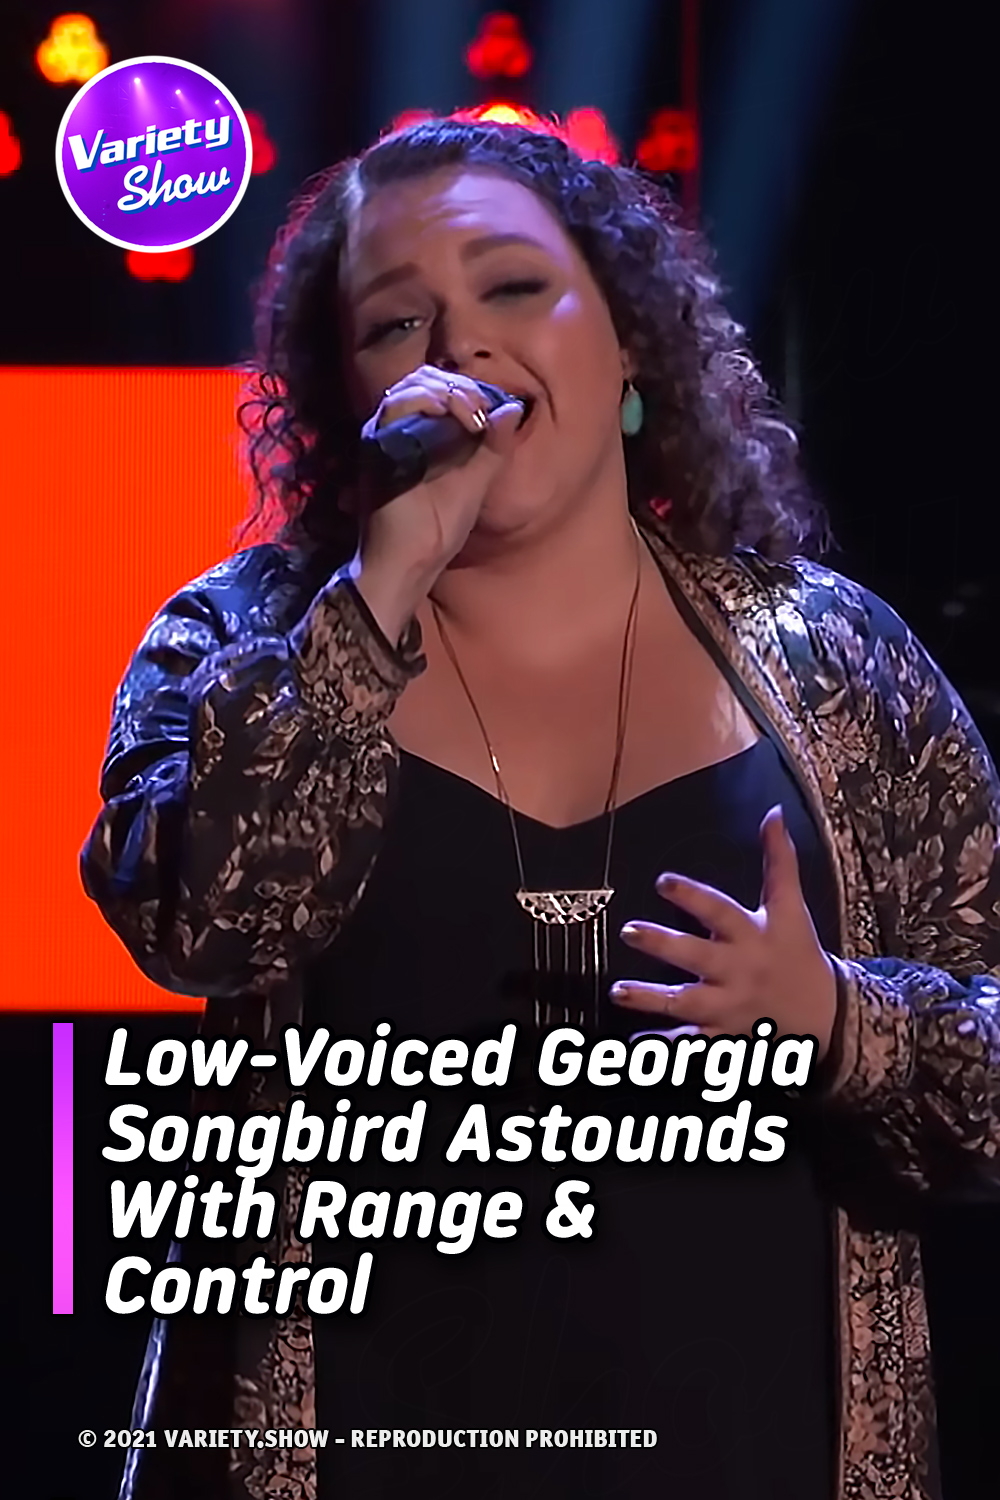 Low-Voiced Georgia Songbird Astounds With Range & Control